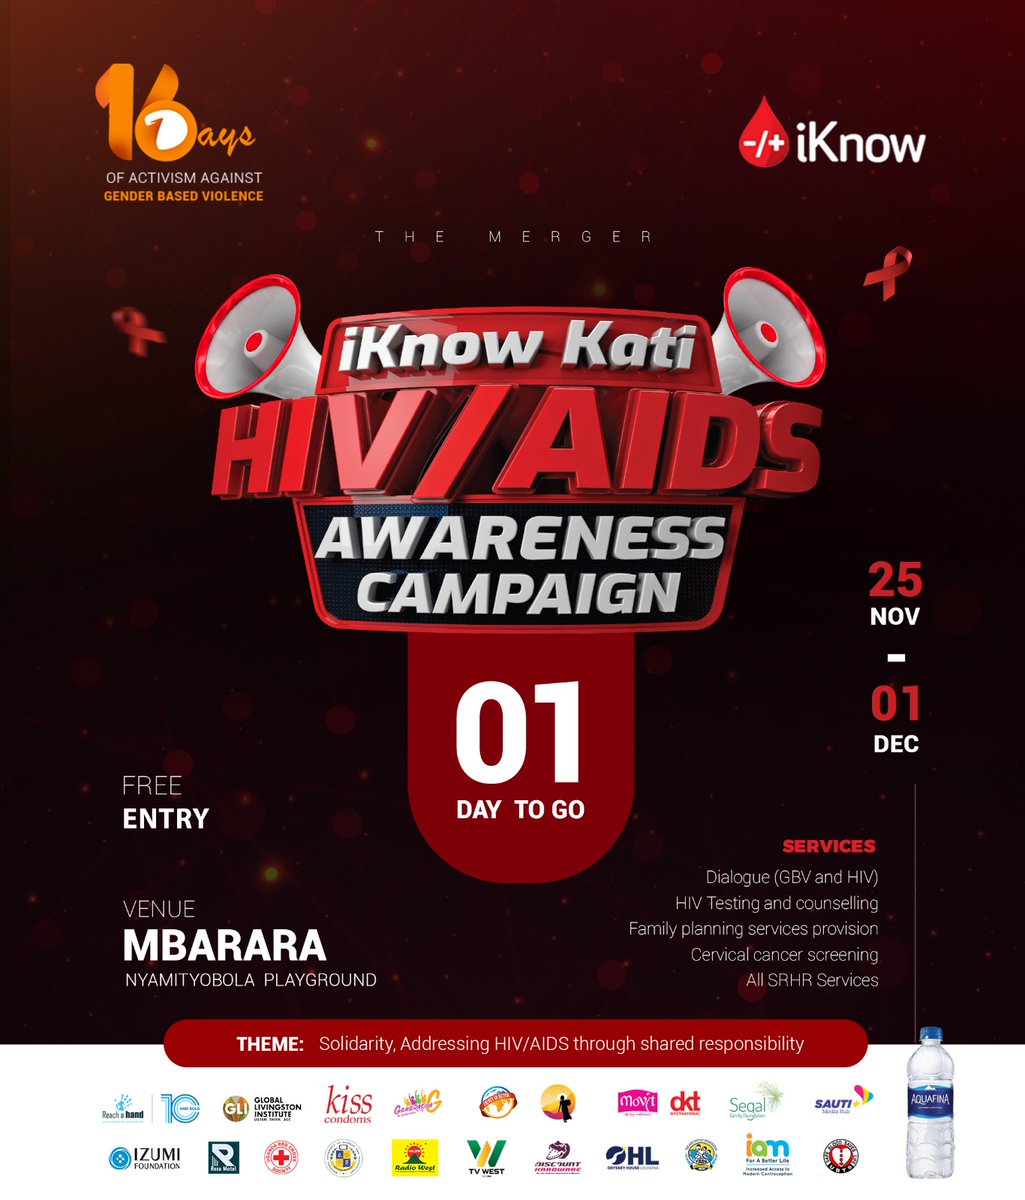 World AIDS Day highlights the impact of HIV/AIDS, mirroring Kyaddala's narrative on youth and its ripple effects. It vividly portrays the virus's spread, emphasizing its diverse impacts. This day underscores the need for awareness and support in combating HIV/AIDS.#IknowKatiUG23